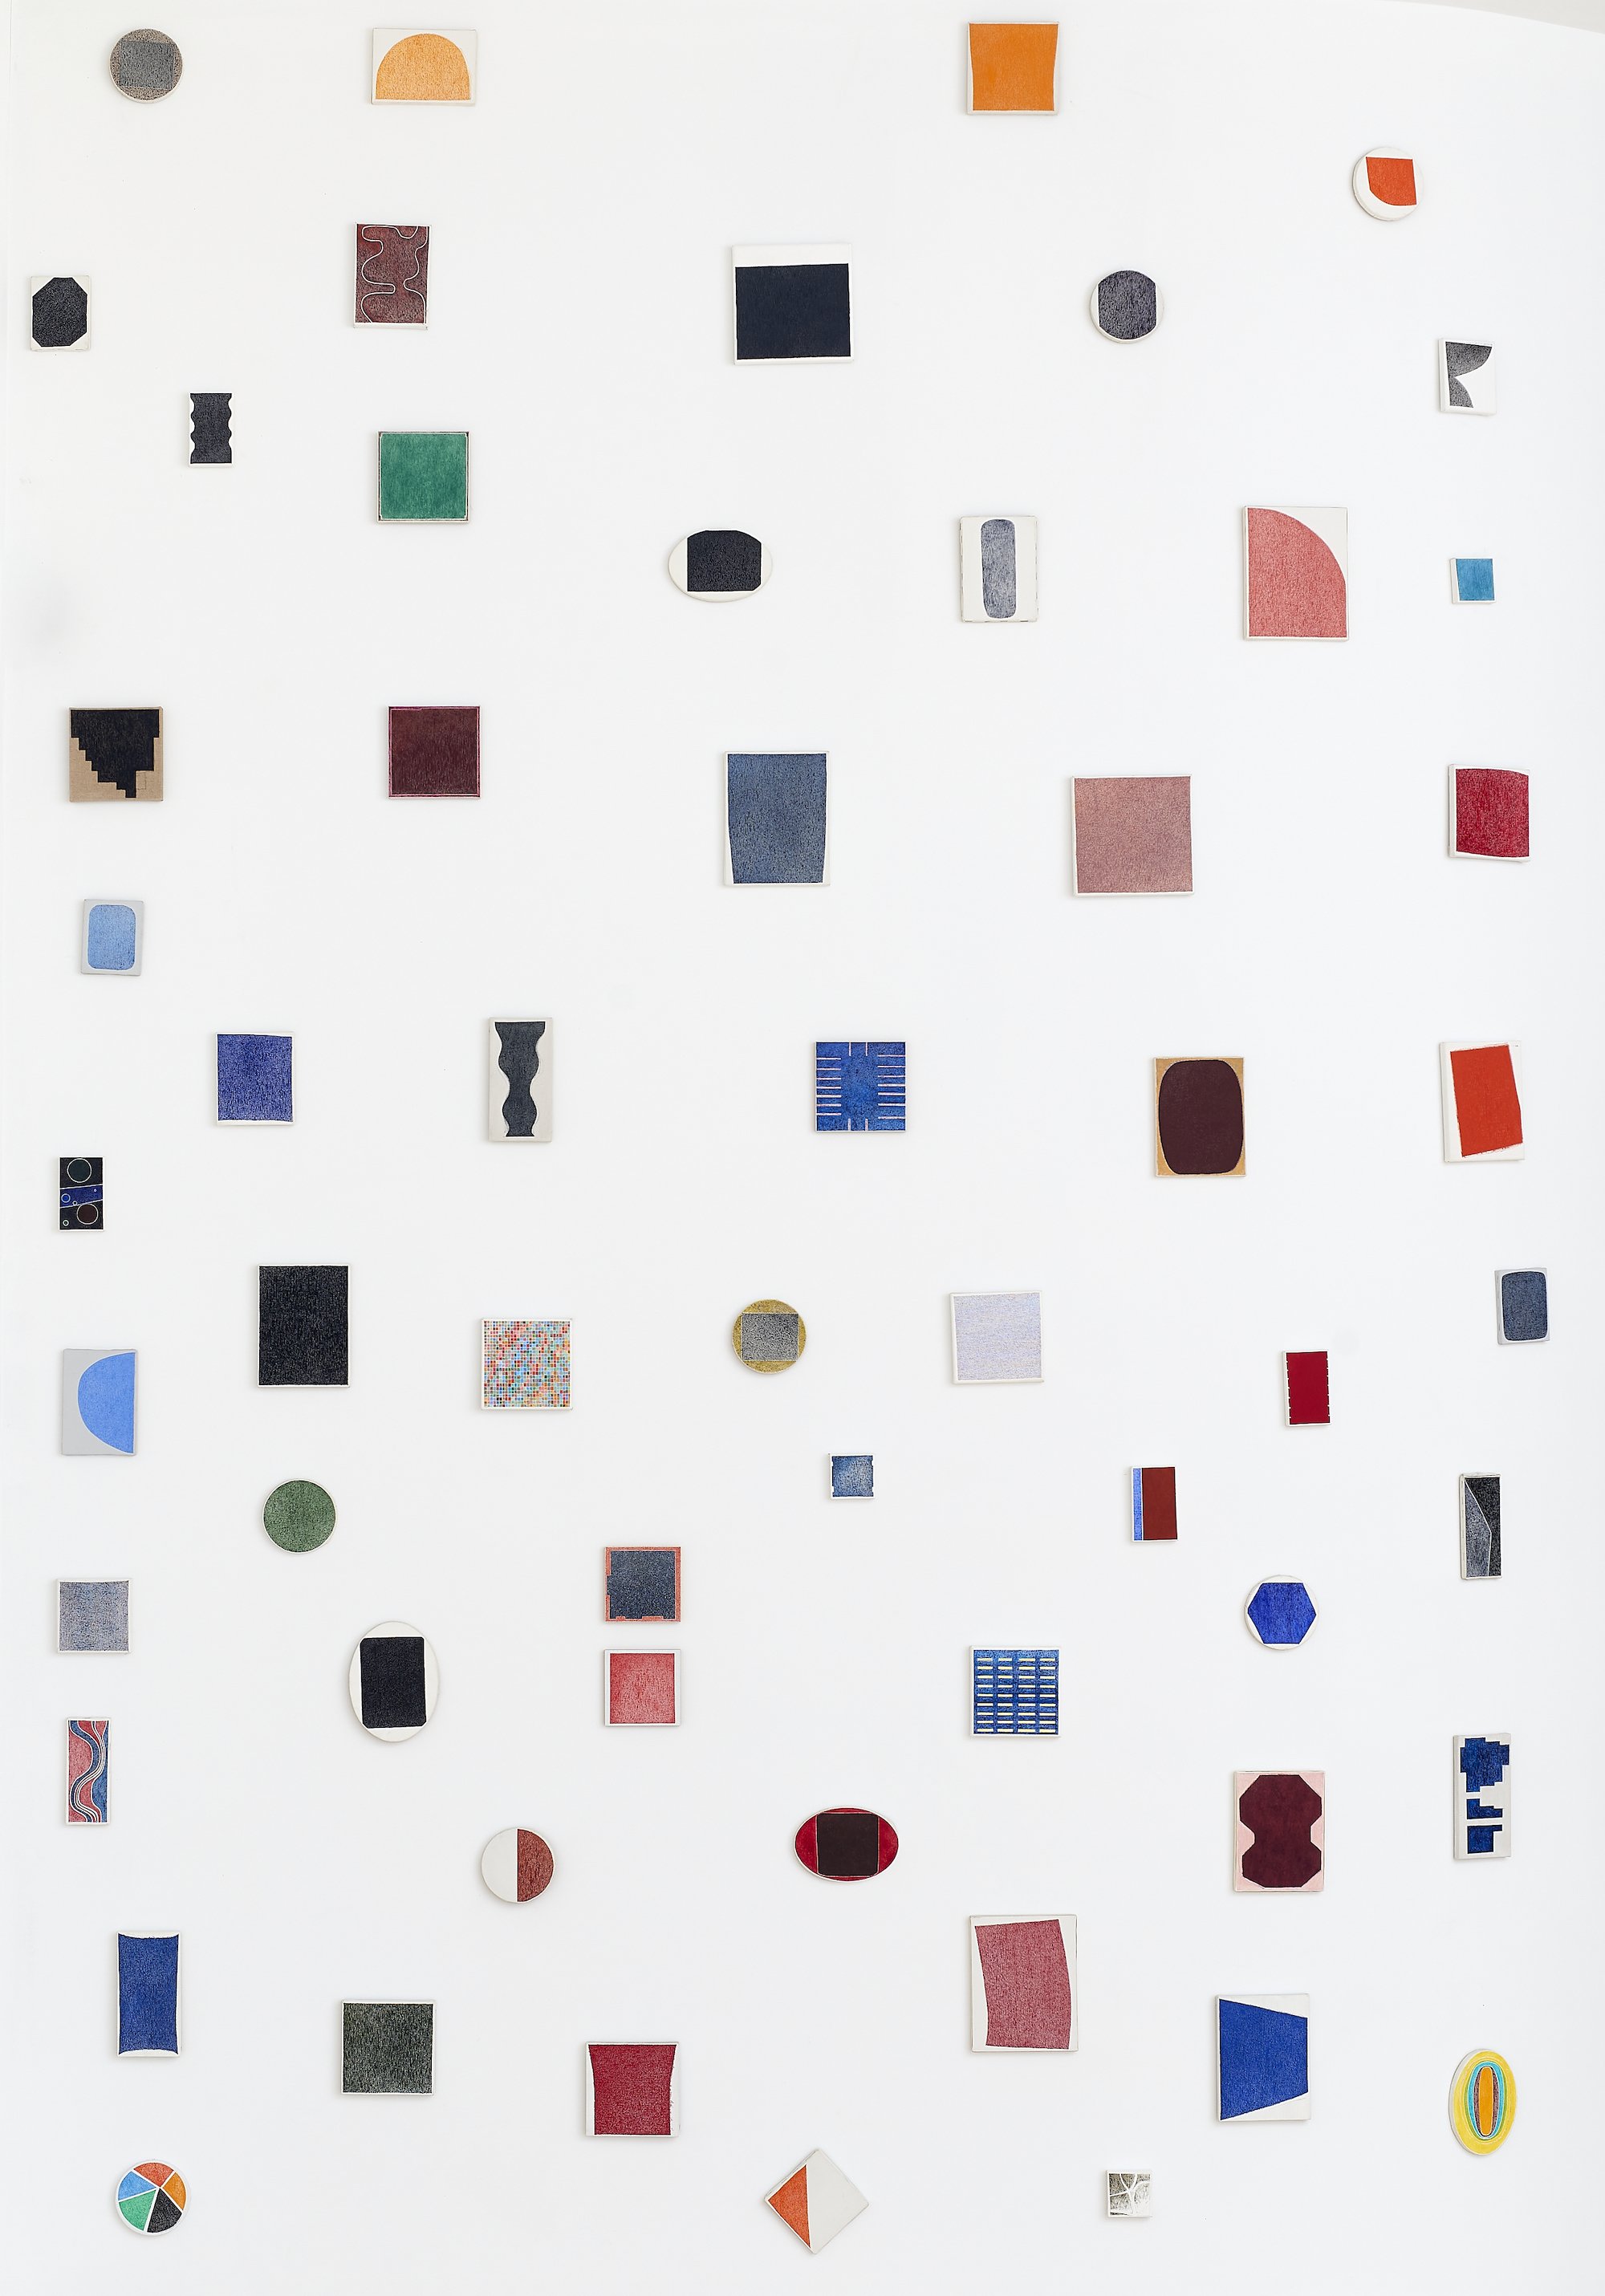   Howard Smith,   Universe #31 , 1991 - Present. Oil on linen, Dimensions Variable. 